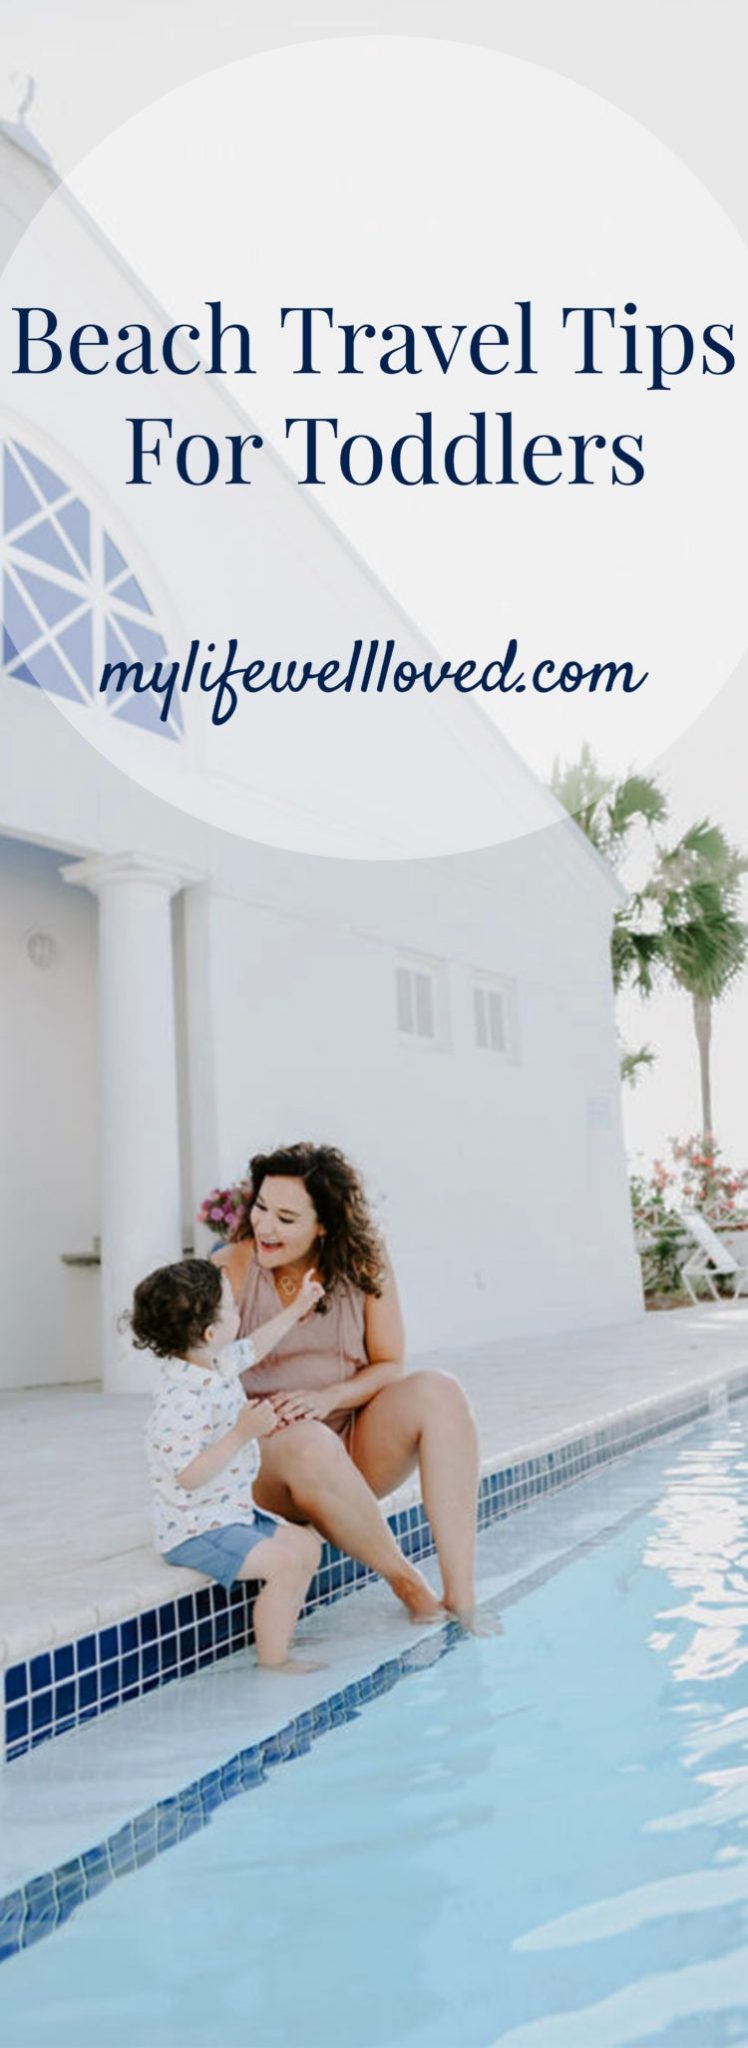 Tips on Travel with Kids from healthy lifestyle blogger Heather of MyLifeWellLoved.com // Whether you're a toddler mom or have a new baby, this post is super helpful for your next beach trip! #mom #travel #familytravel sunscreen